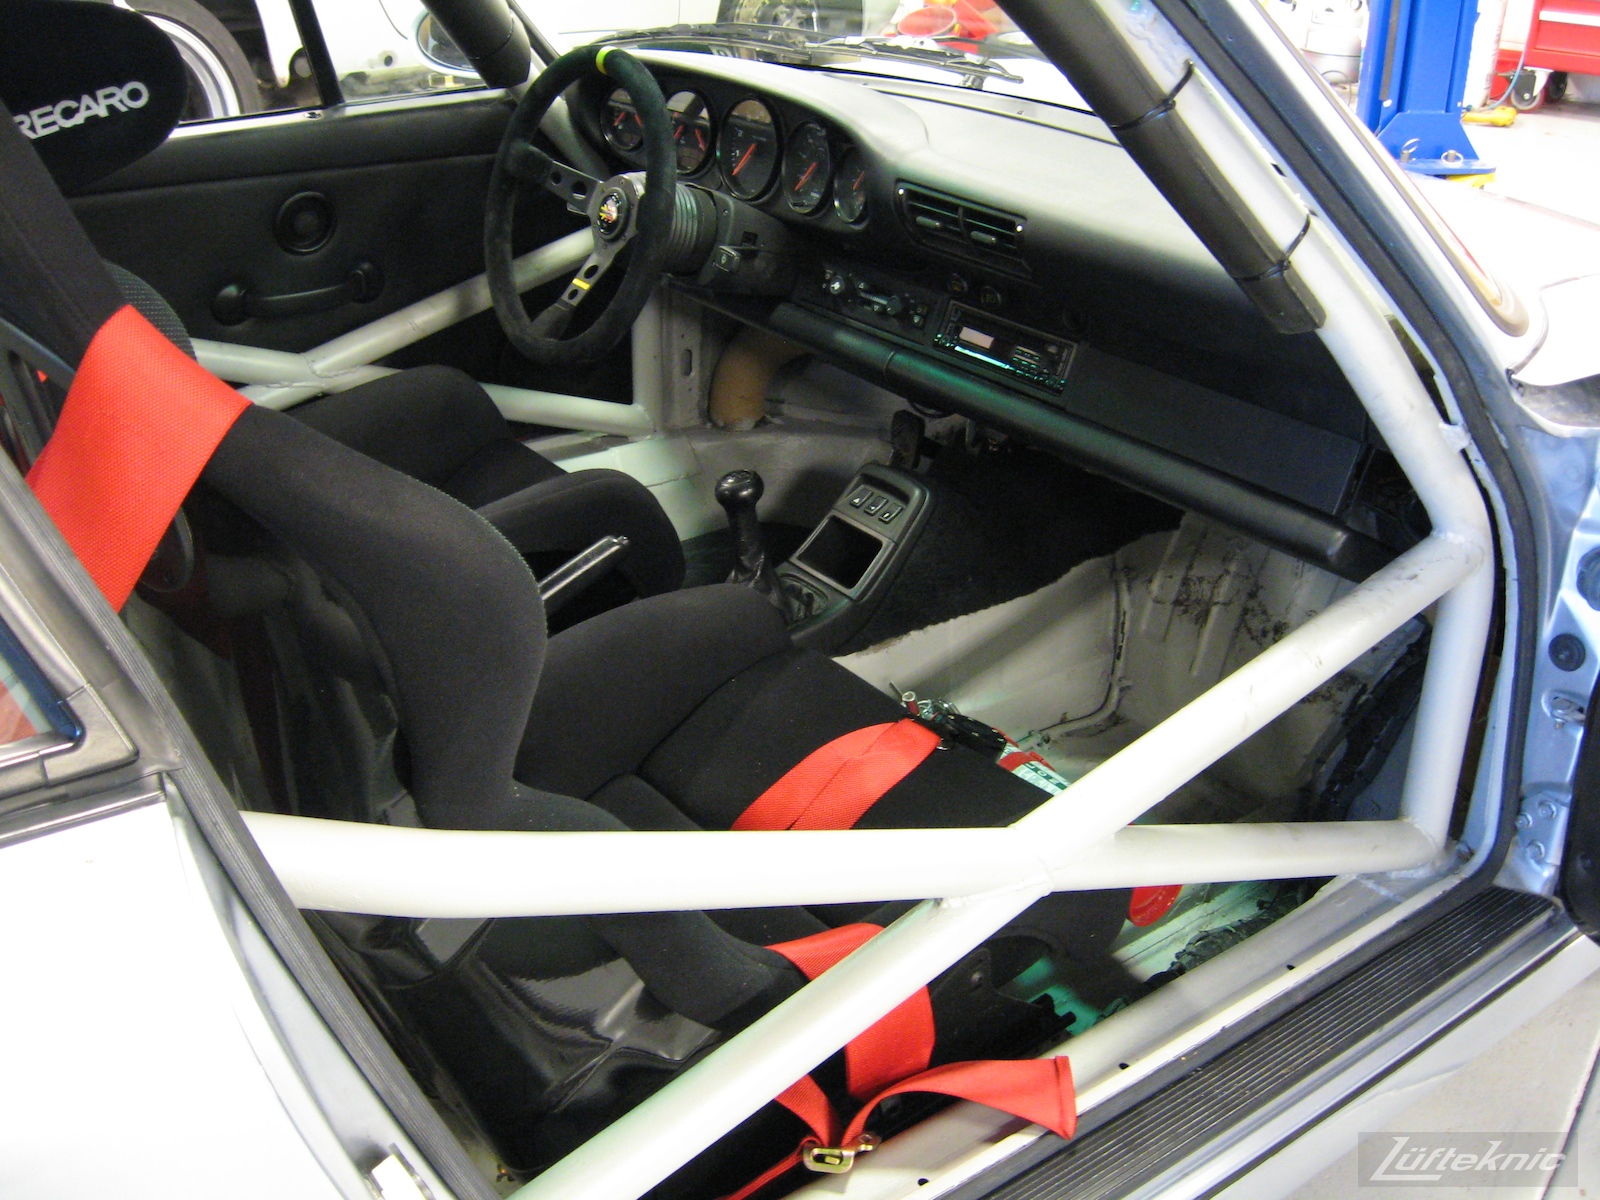 The completed 964 RS America project showing the safety cage, seats and fire extinguisher.